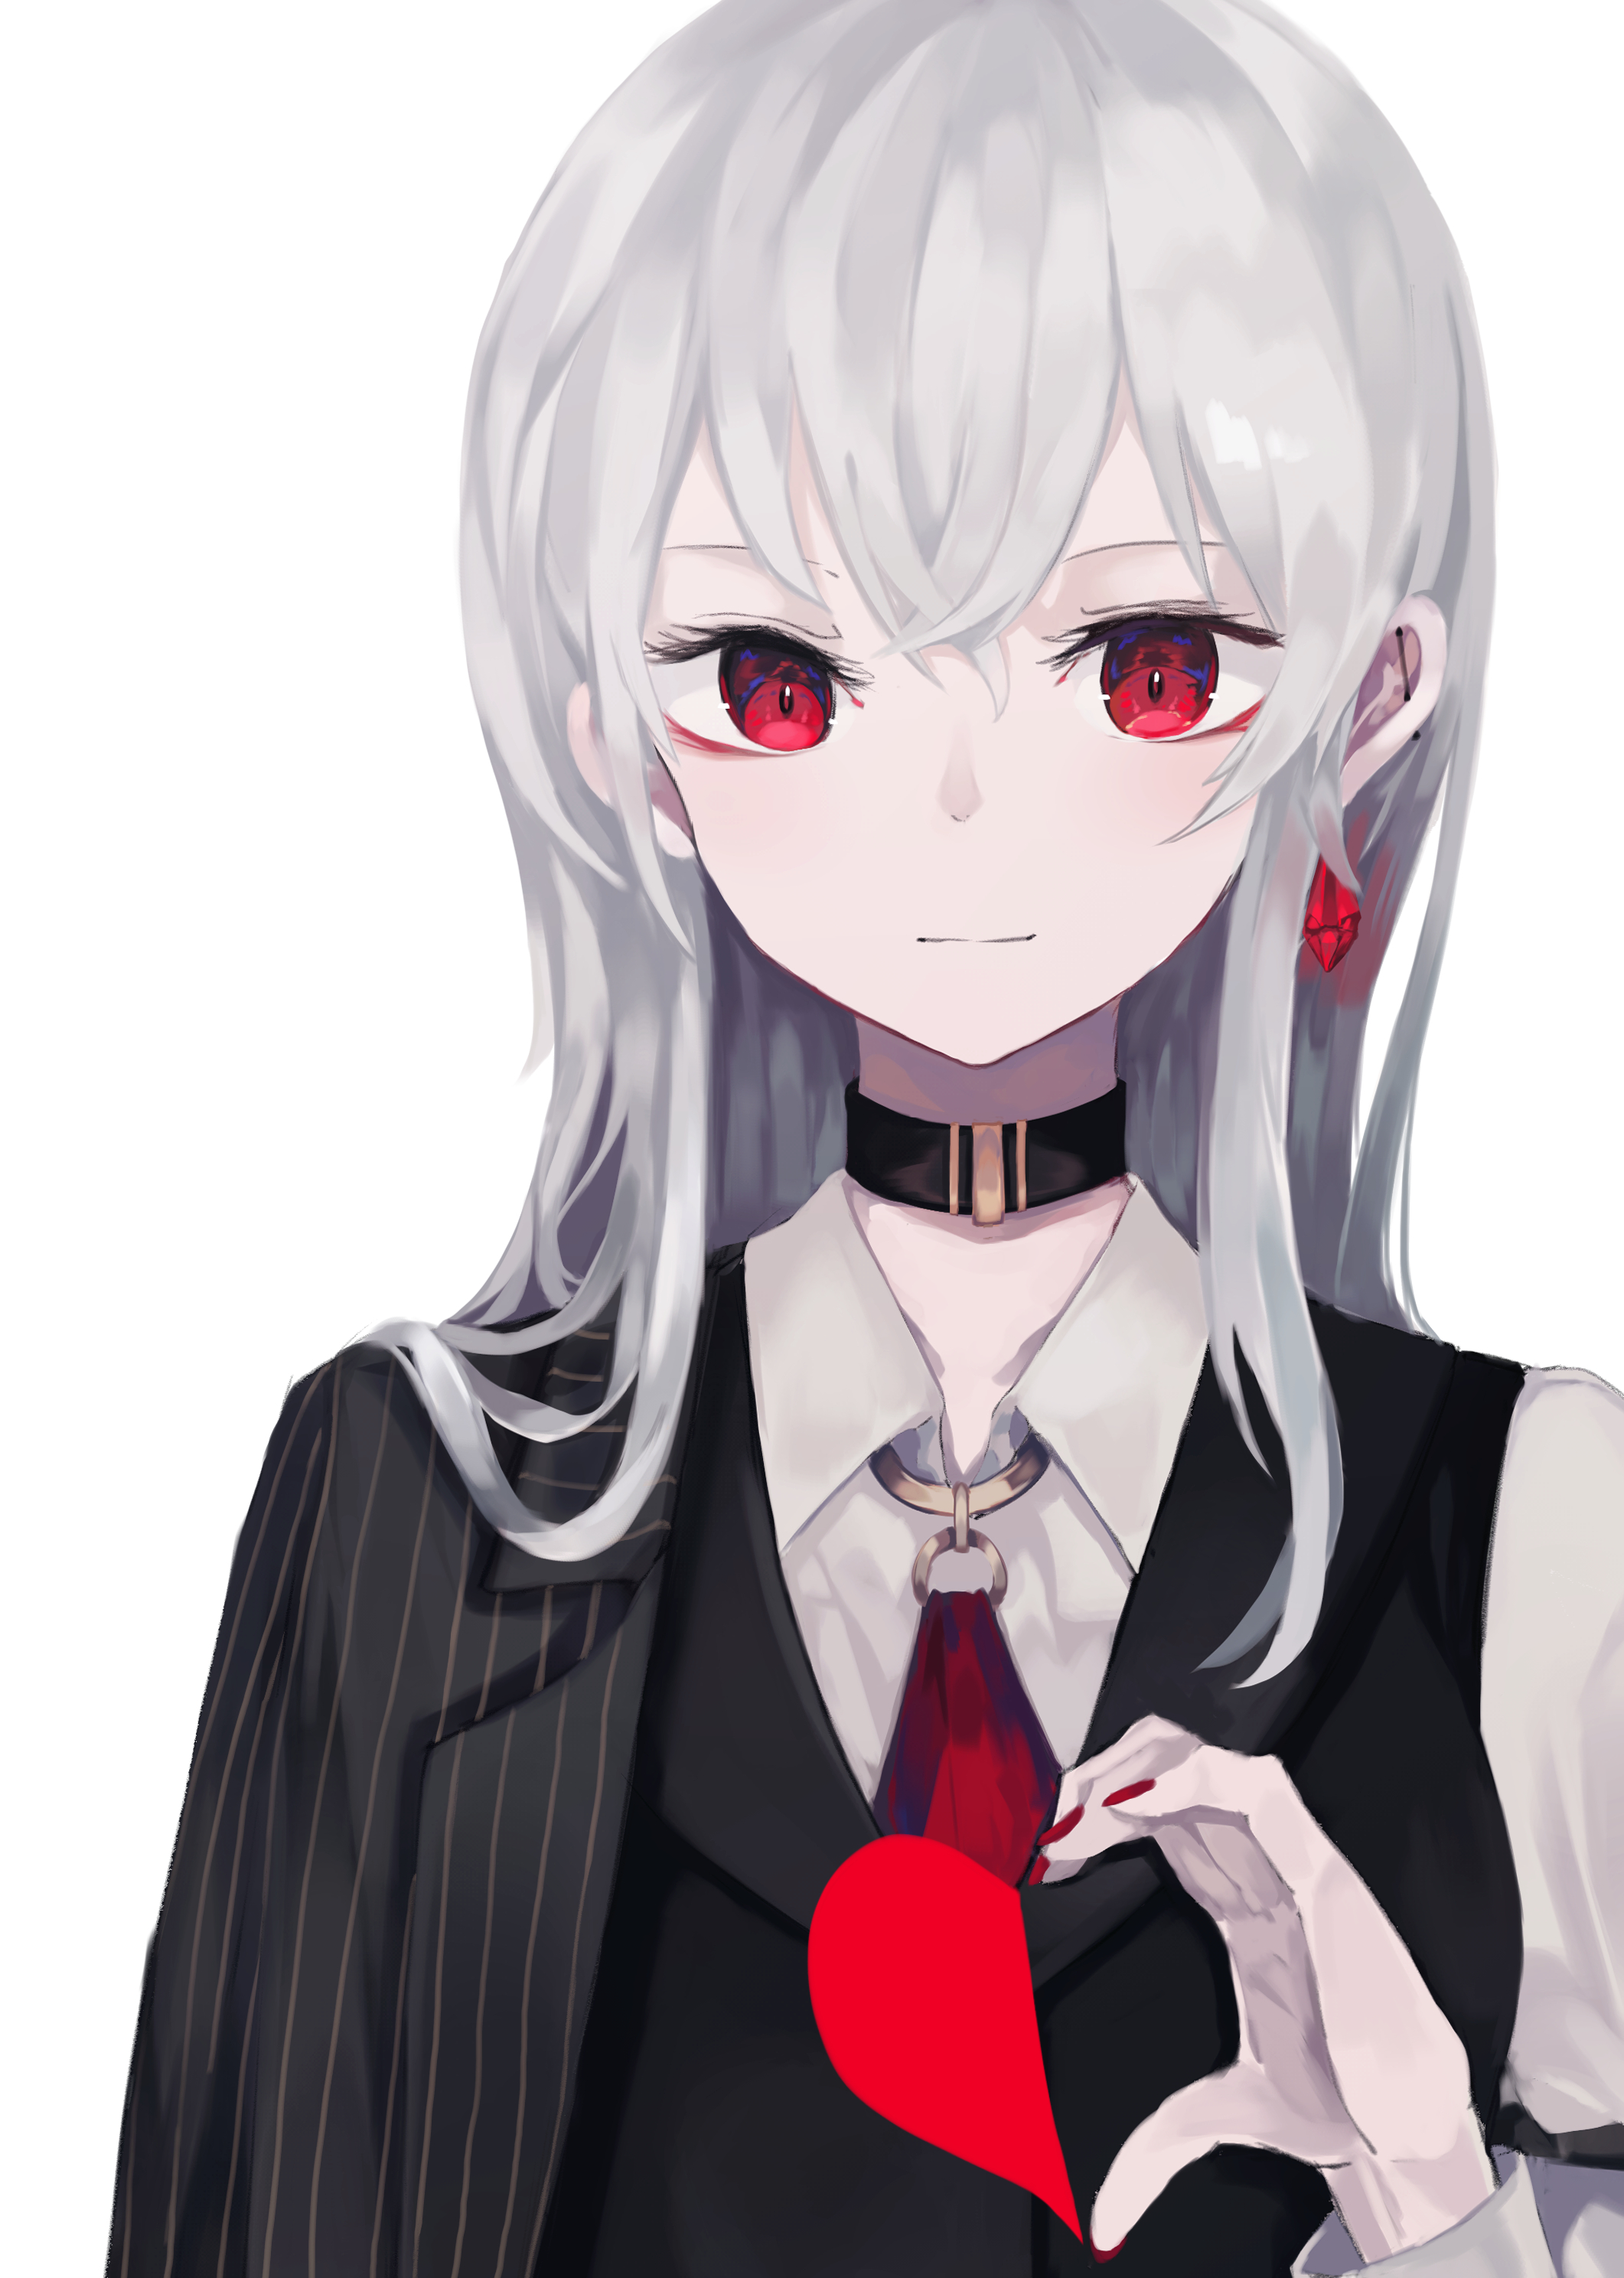 Anime 2122x2976 anime girls anime red eyes painted nails white hair